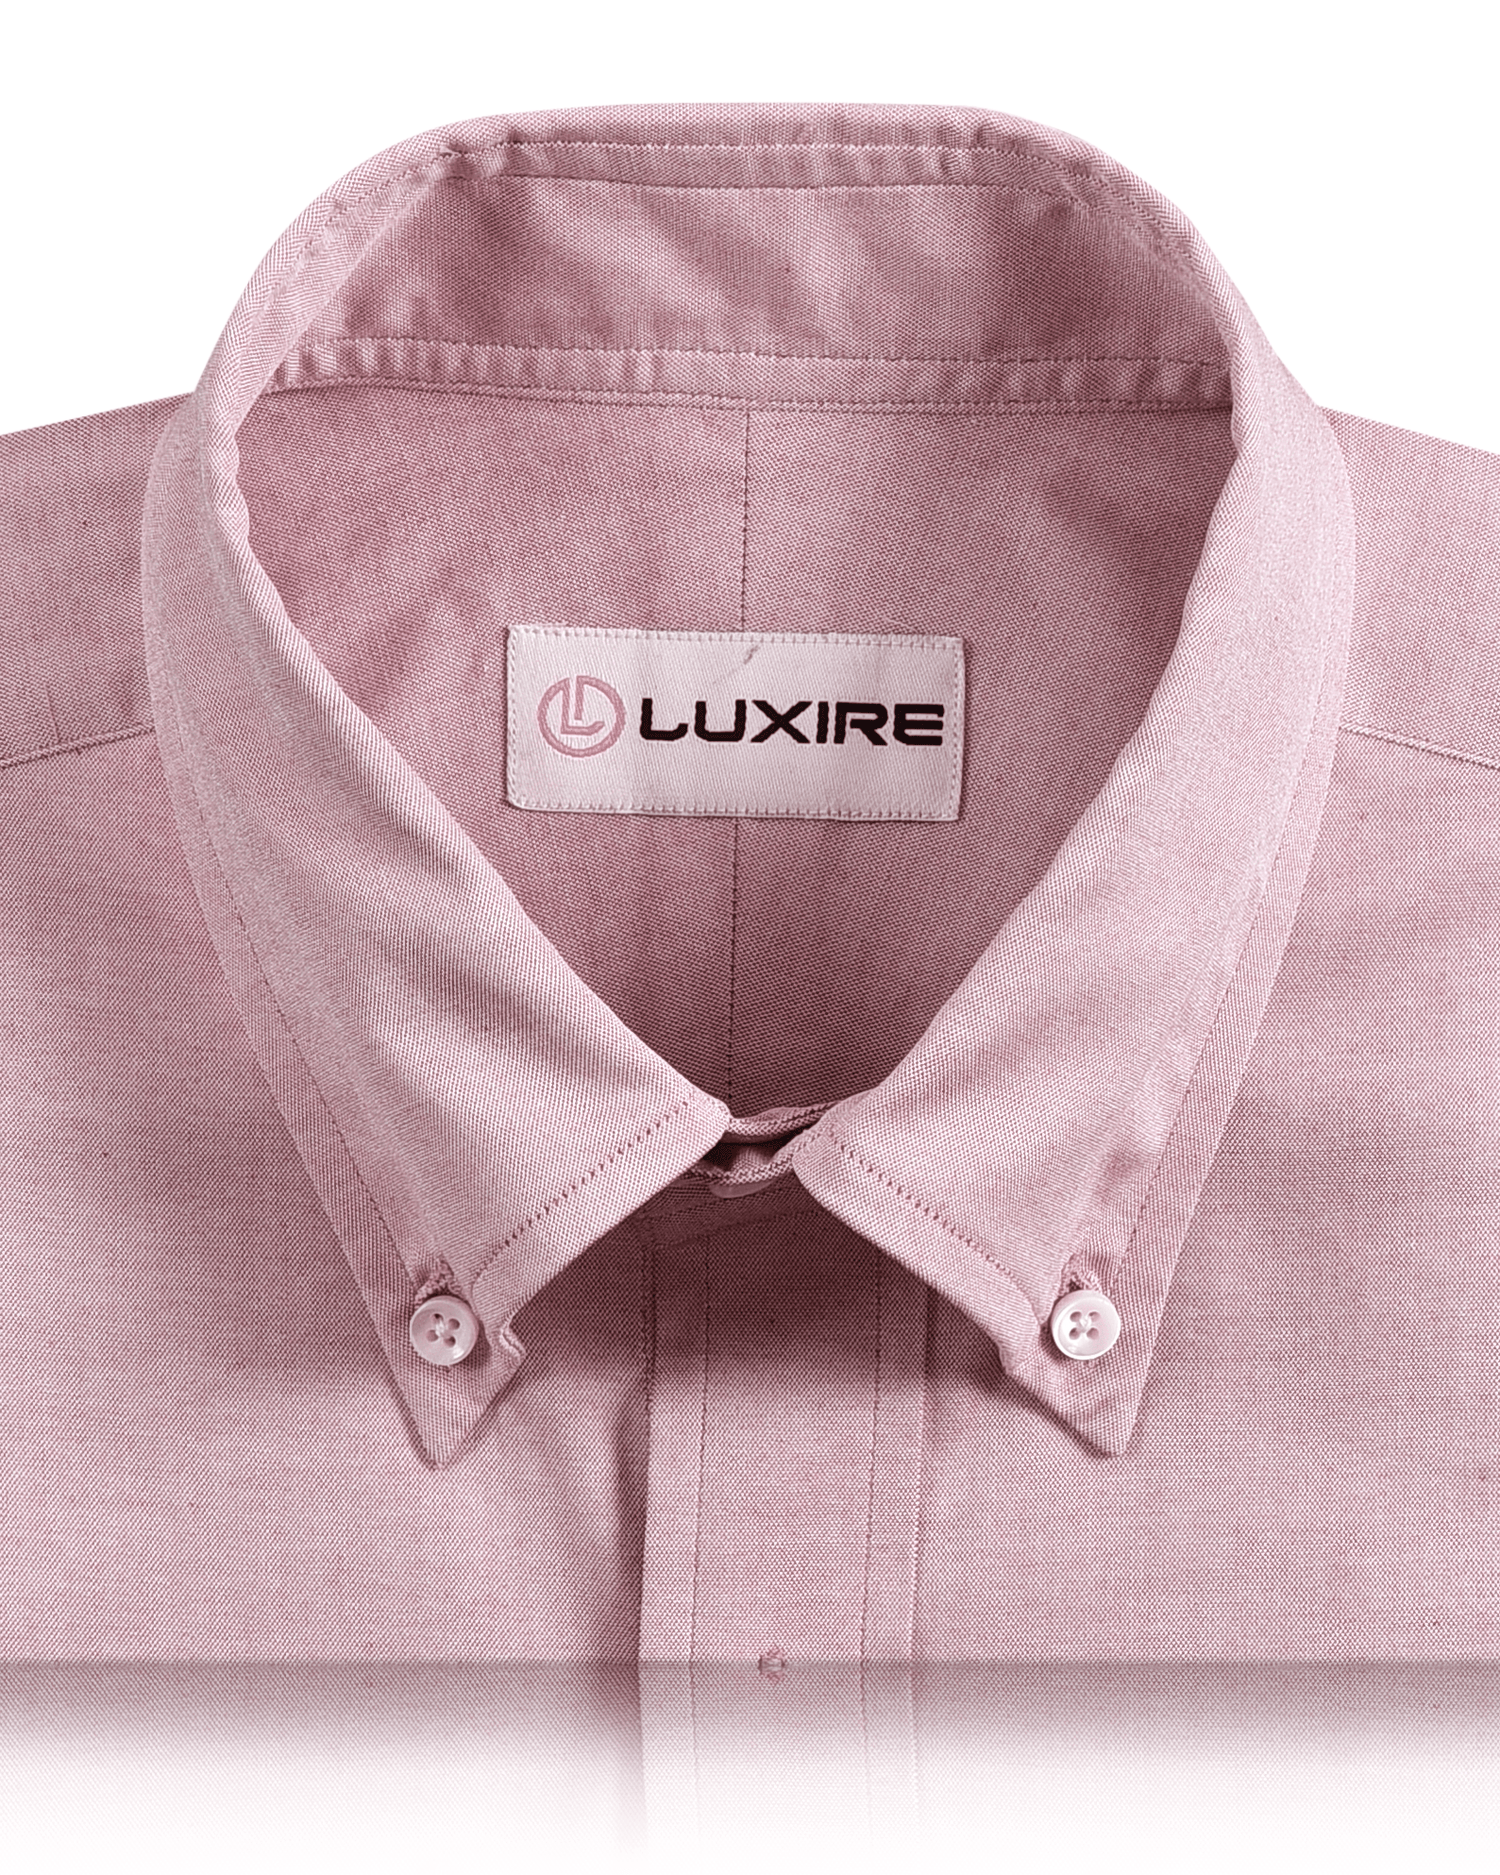 Collar of the custom oxford shirt for men by Luxire in pale maroon